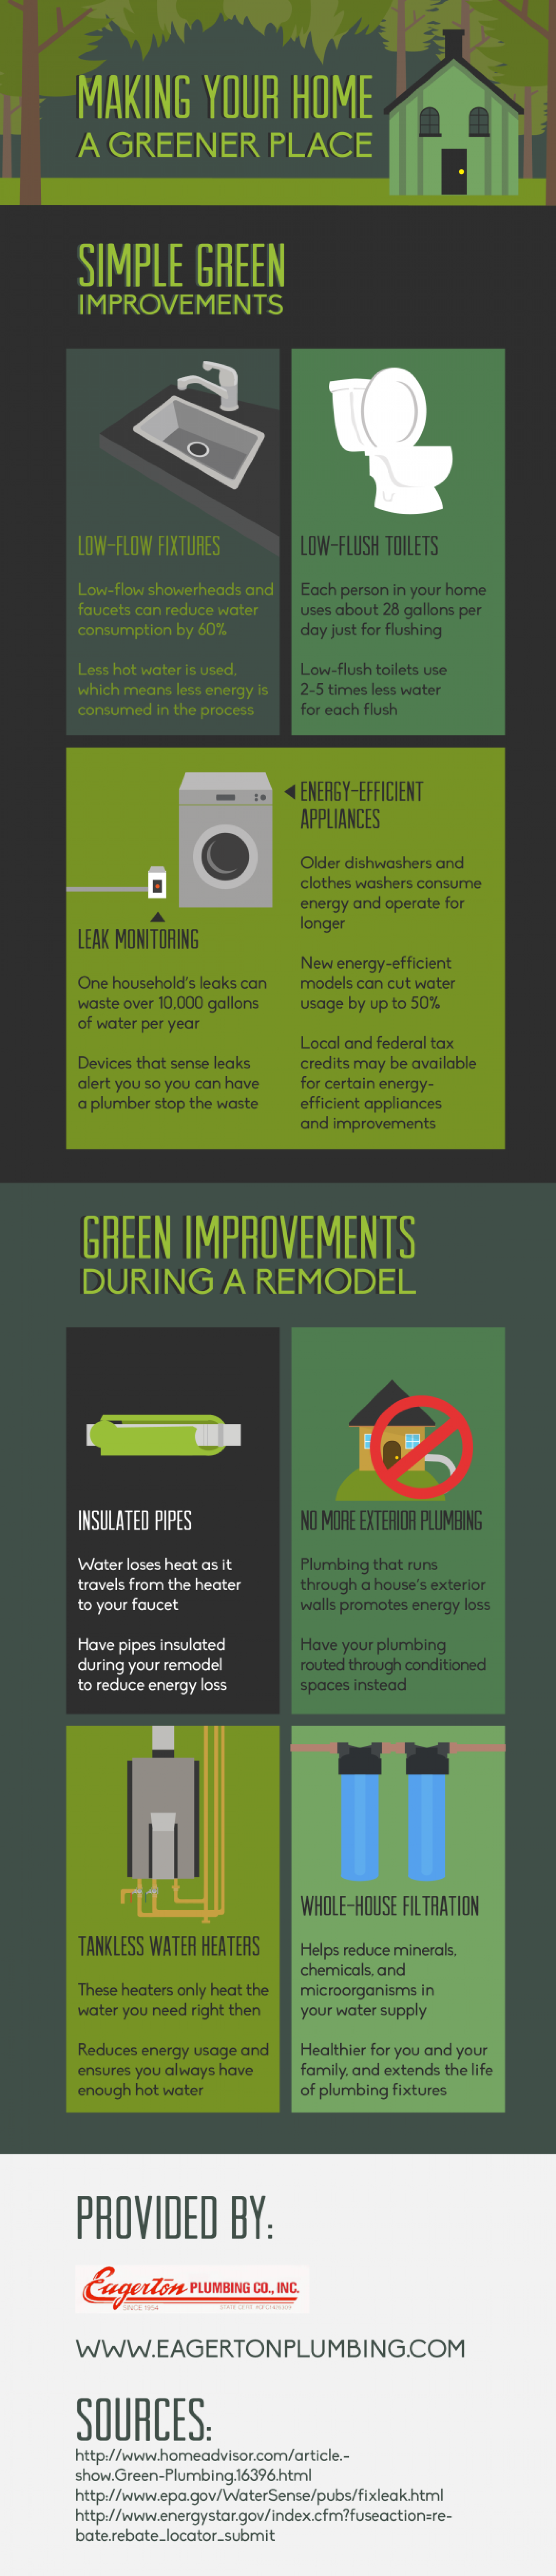 Making Your Home a Greener Place Infographic